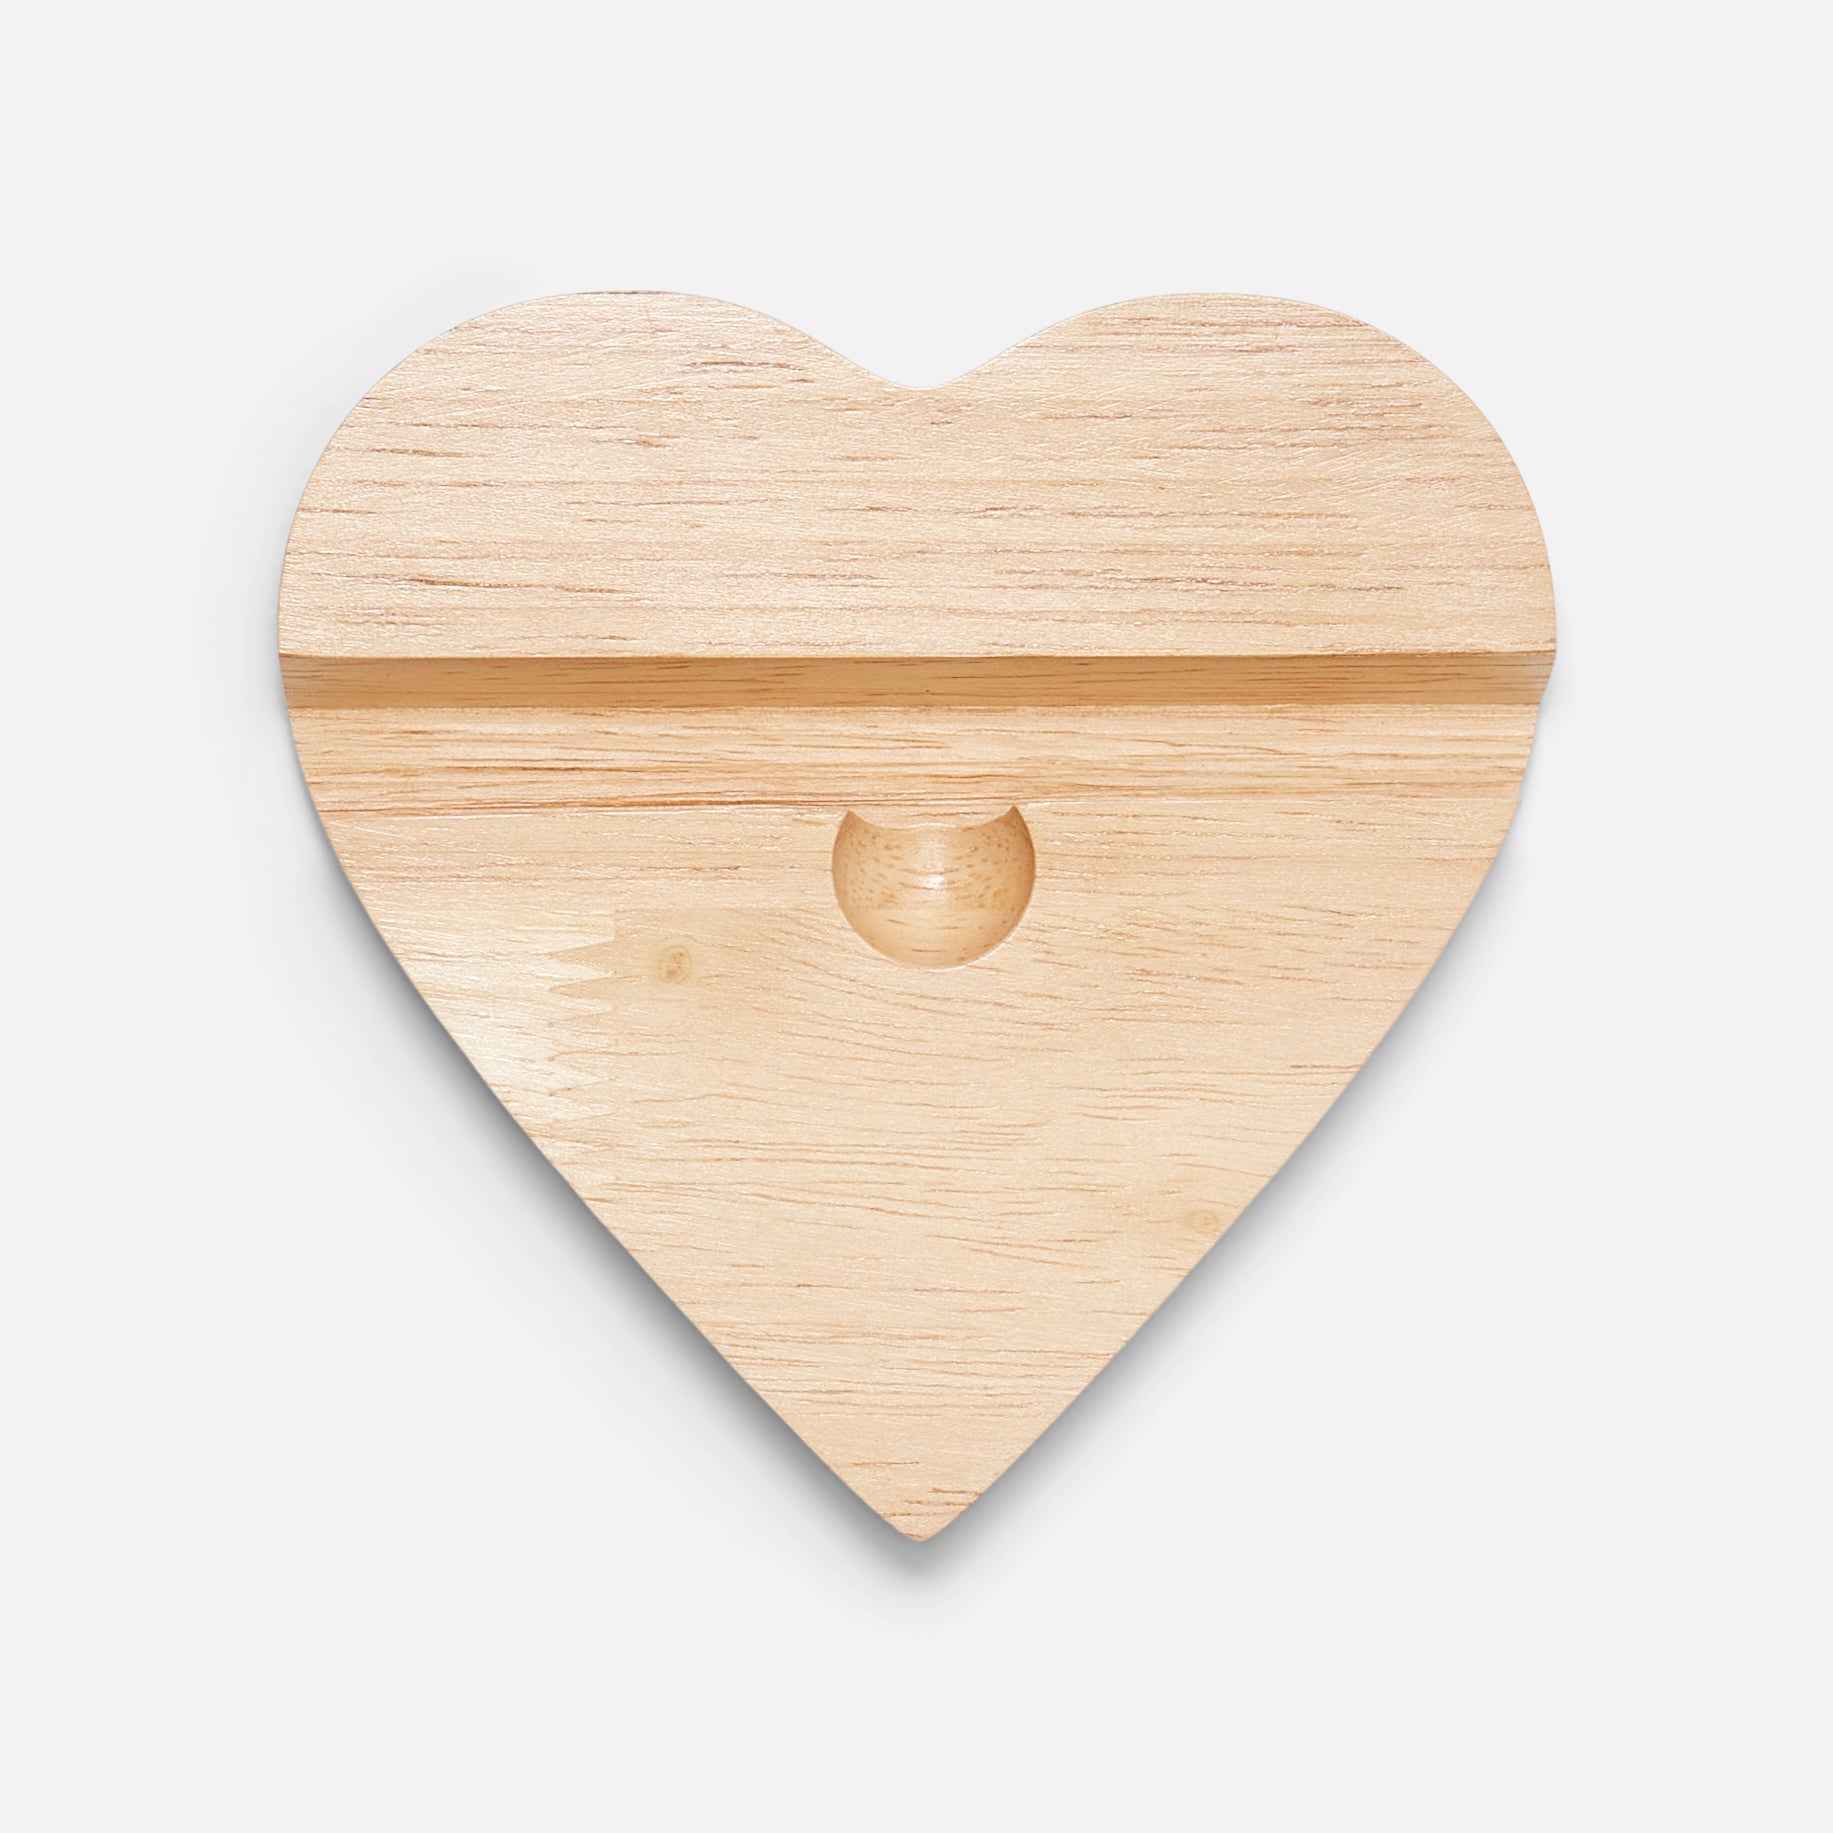 Wooden heart shaped phone stand